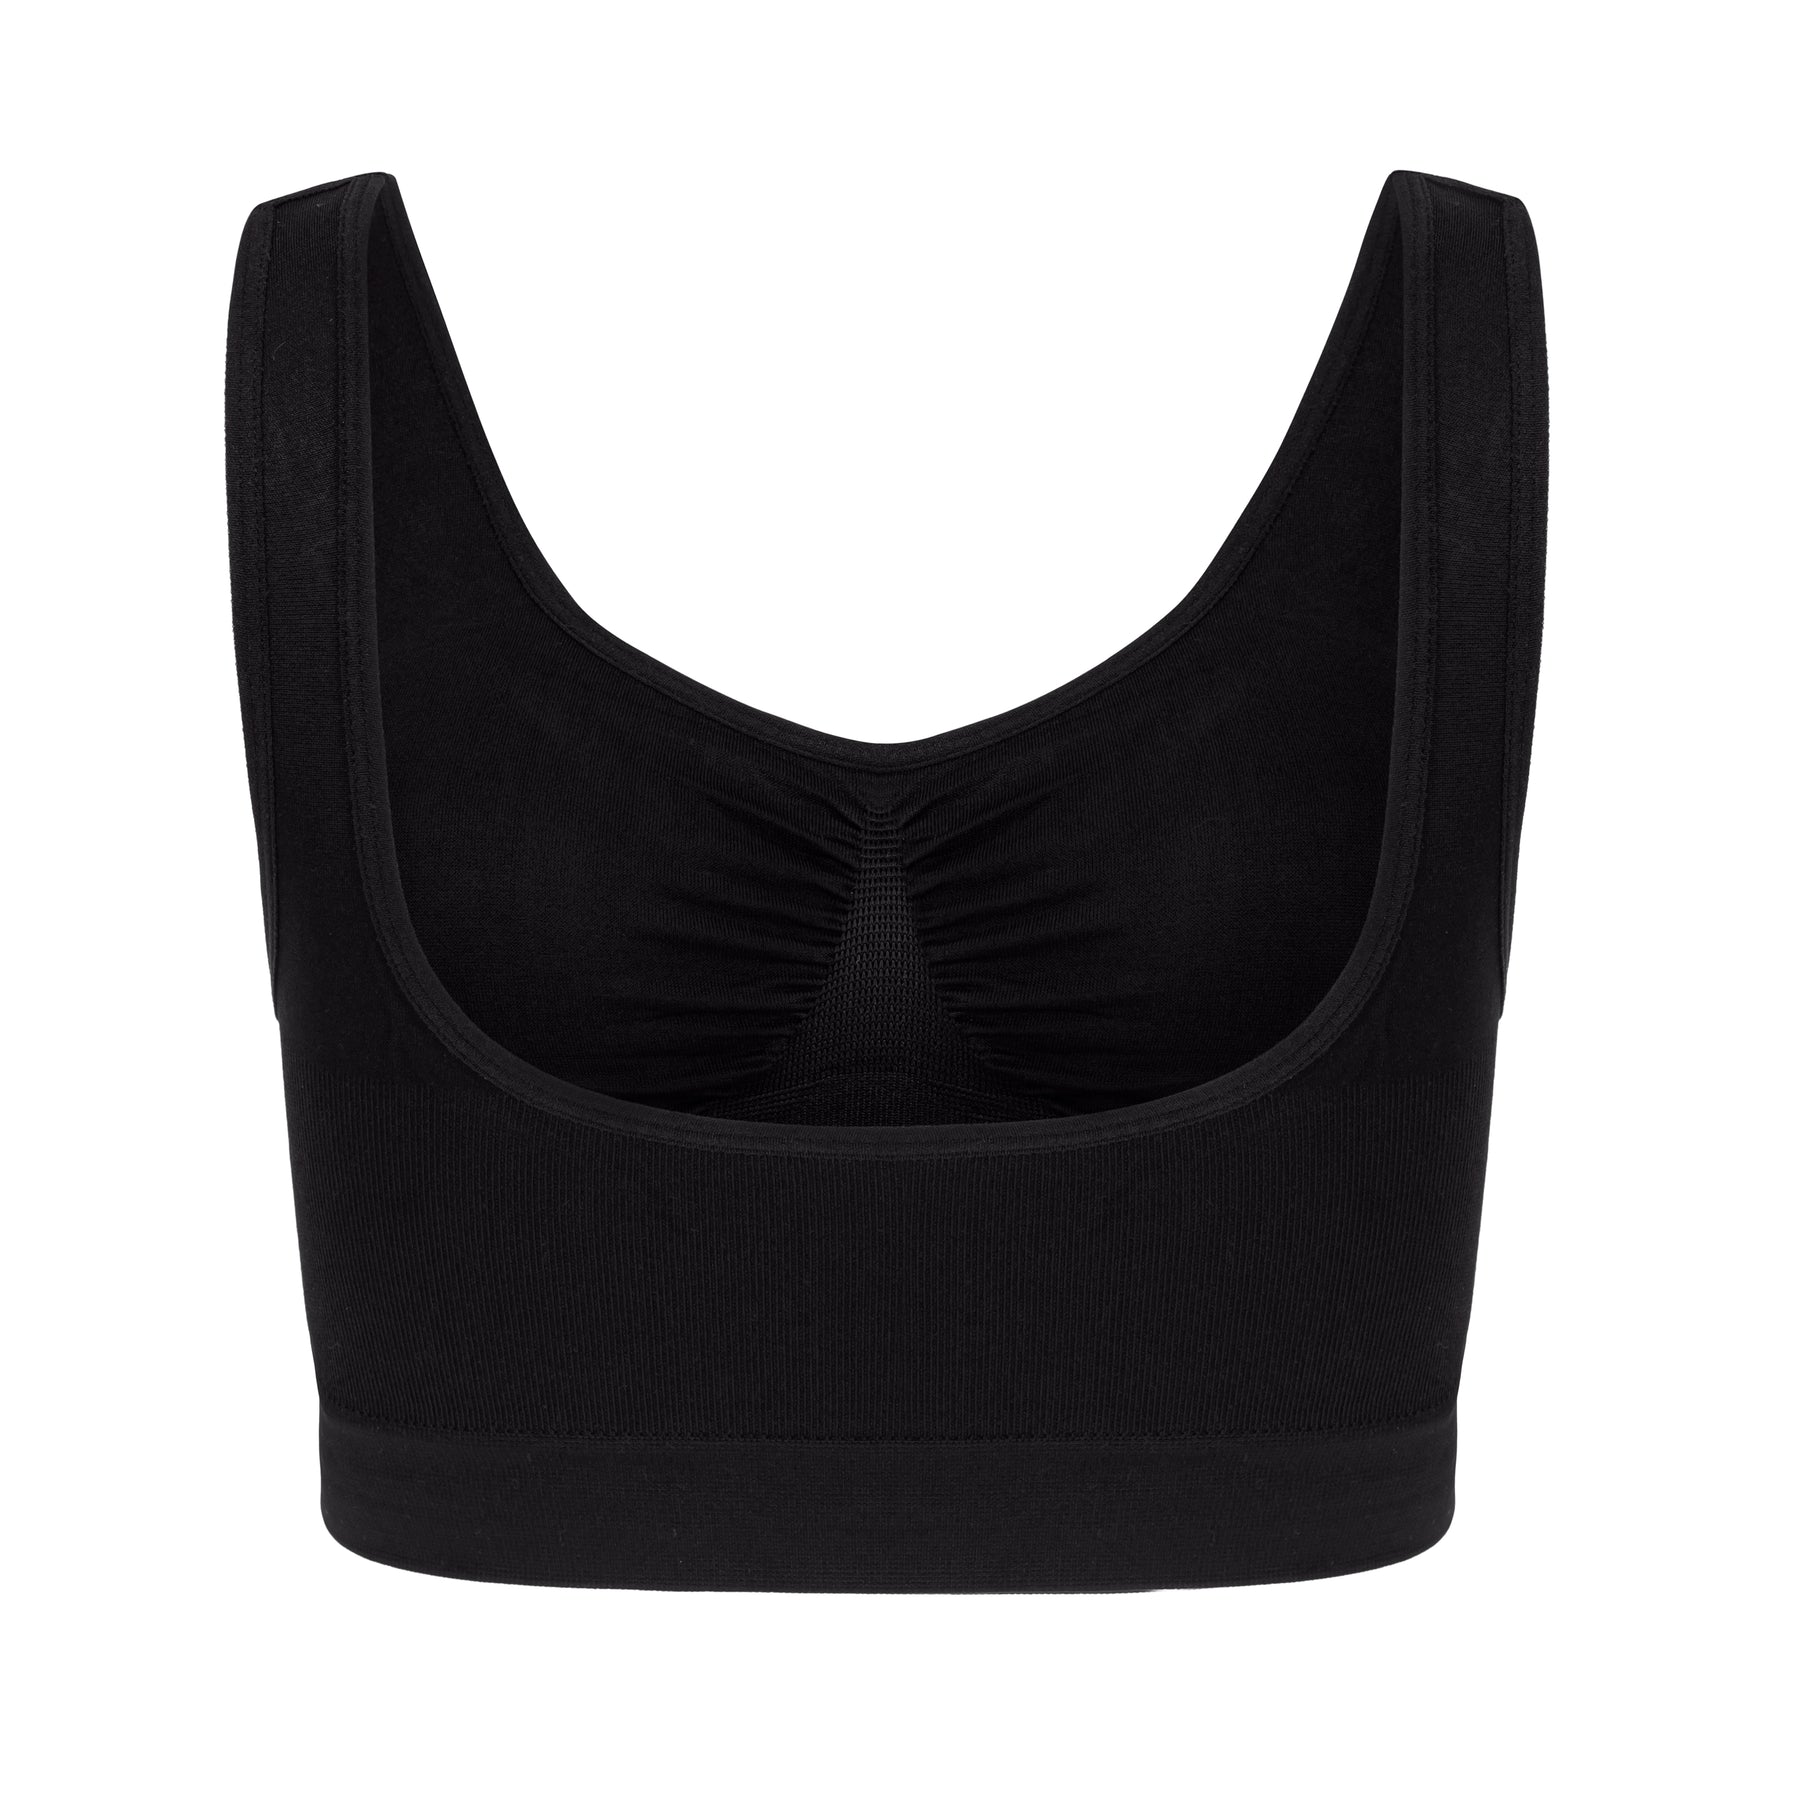 GIVEOWN Katycharm Bras, Comfortable & Convenient Front Closure Button Bra  for Older Women, Cotton Comfy Corset Bra (Black,36/80) at  Women's  Clothing store